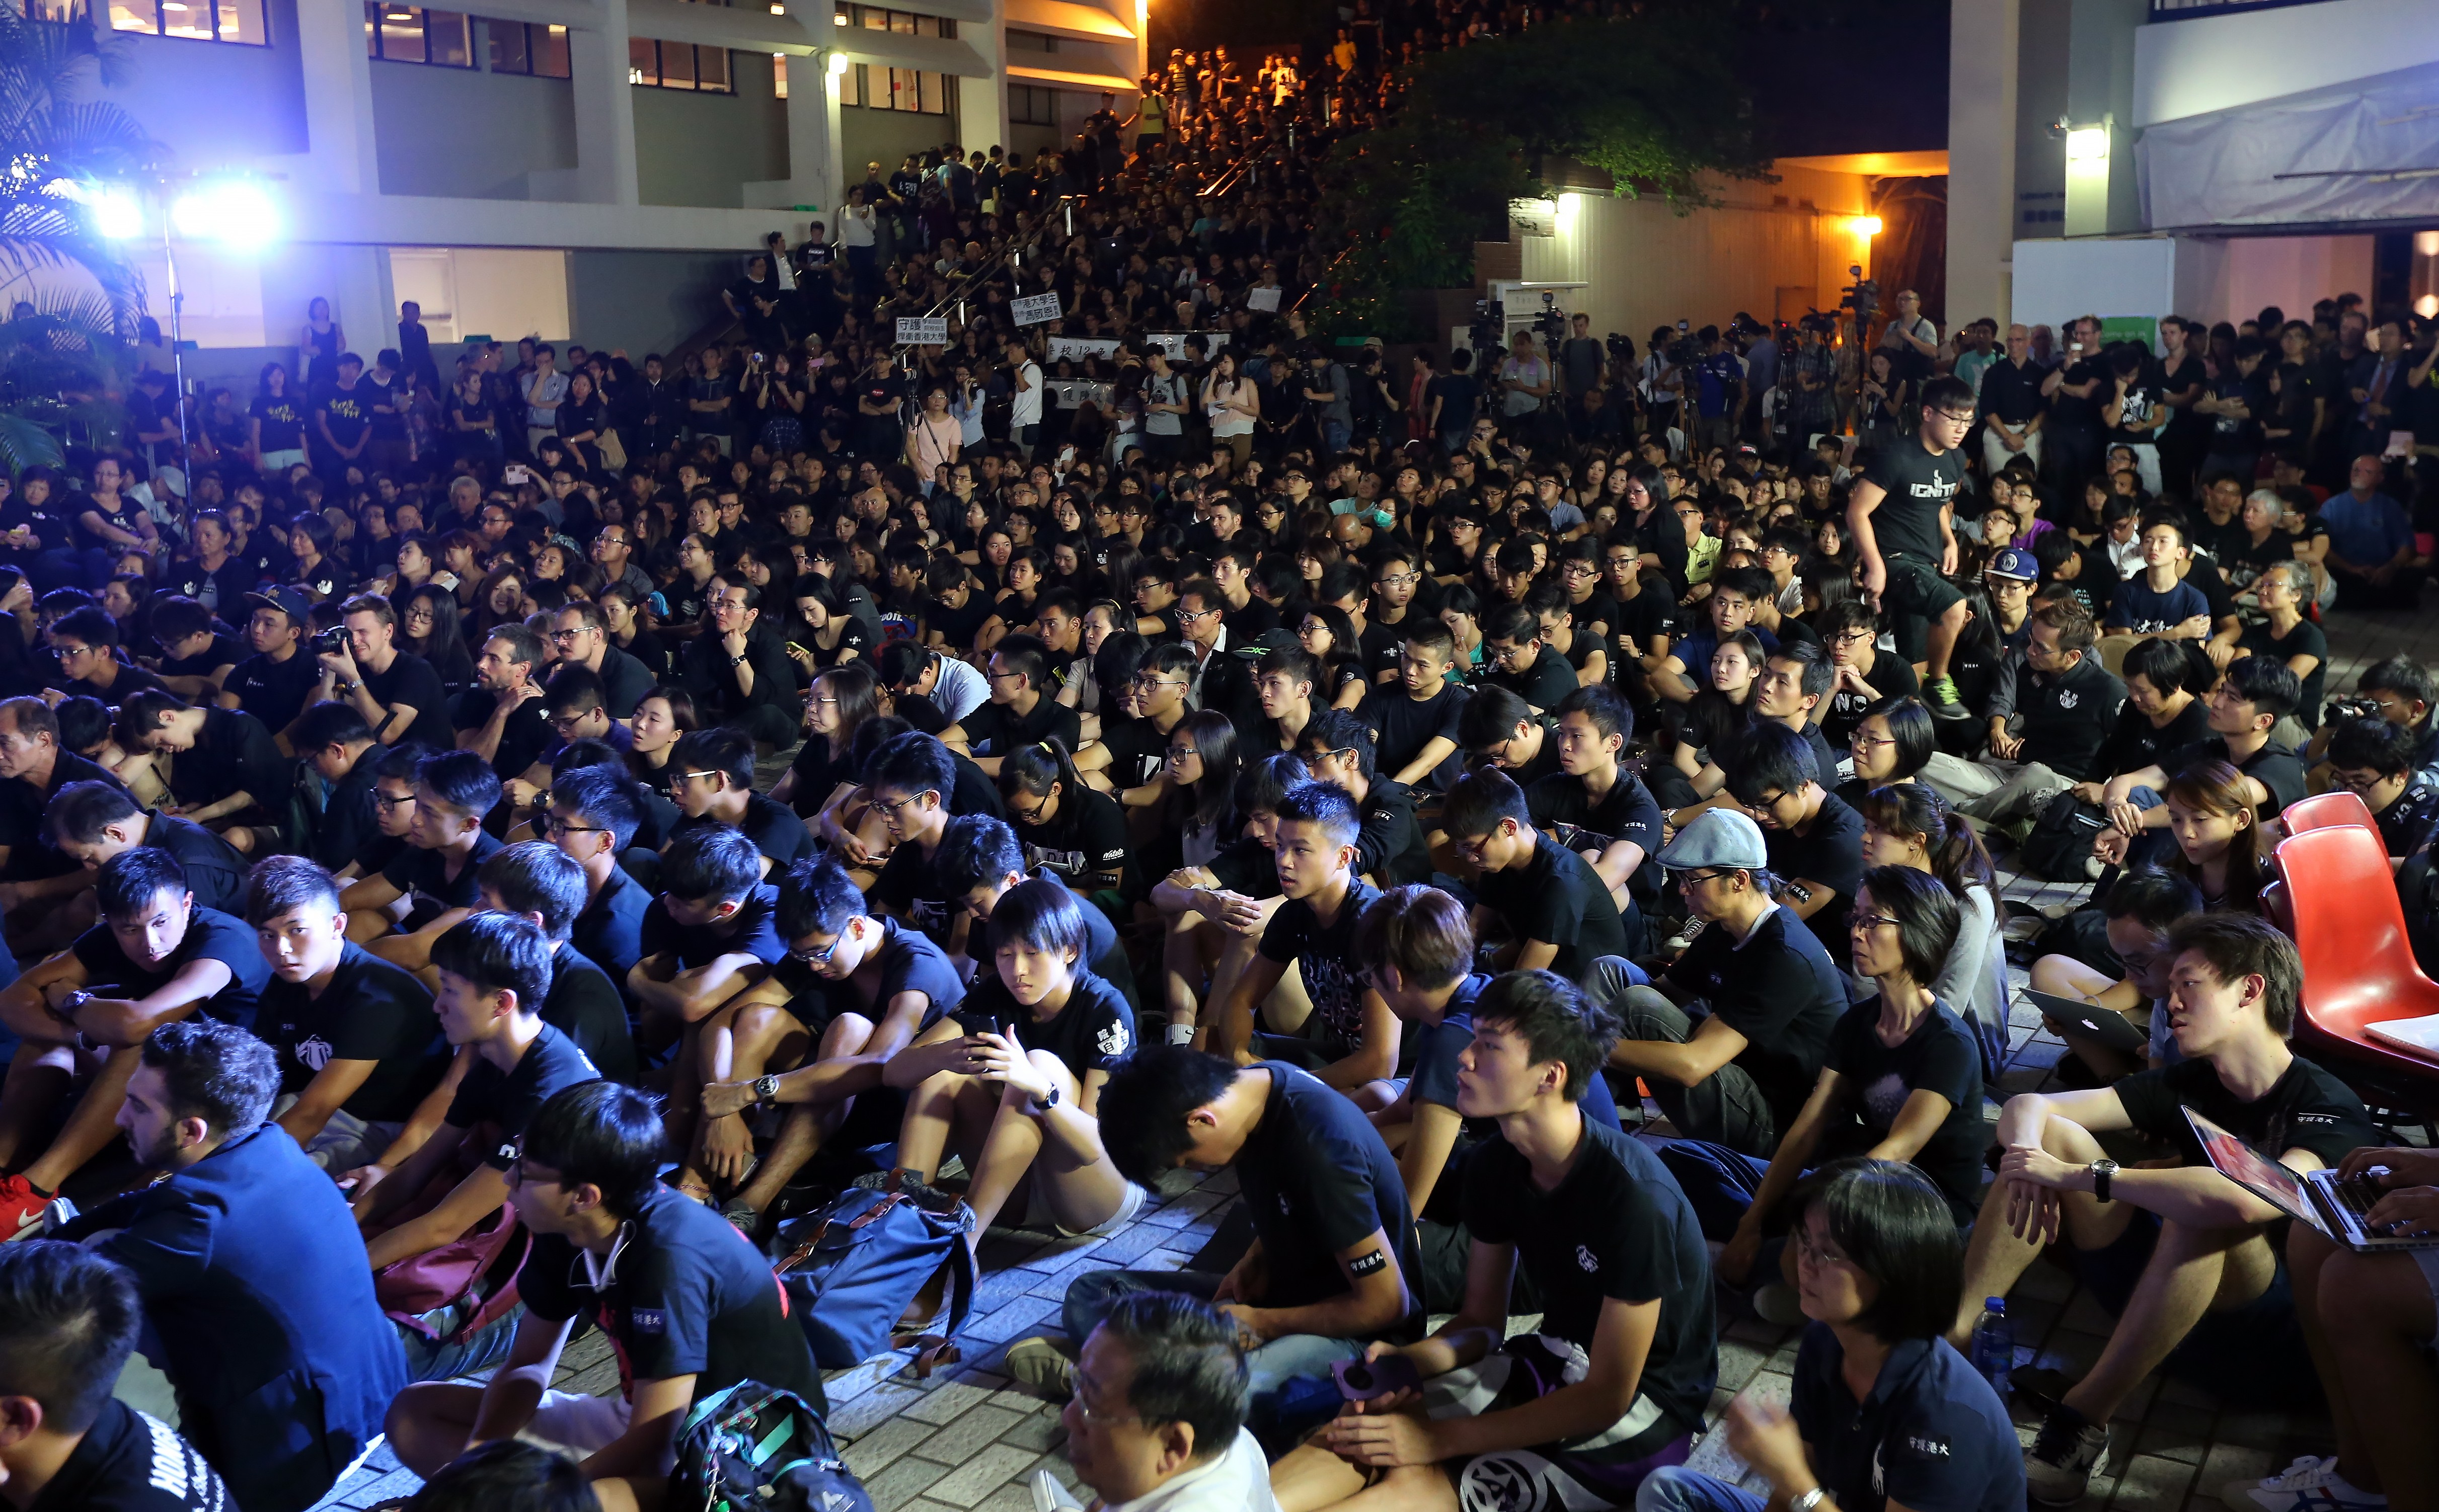 More than 1,500 HKU staff and students, including various concern groups, join a protest against the university's governing council in 2015. Photo: Felix Wong